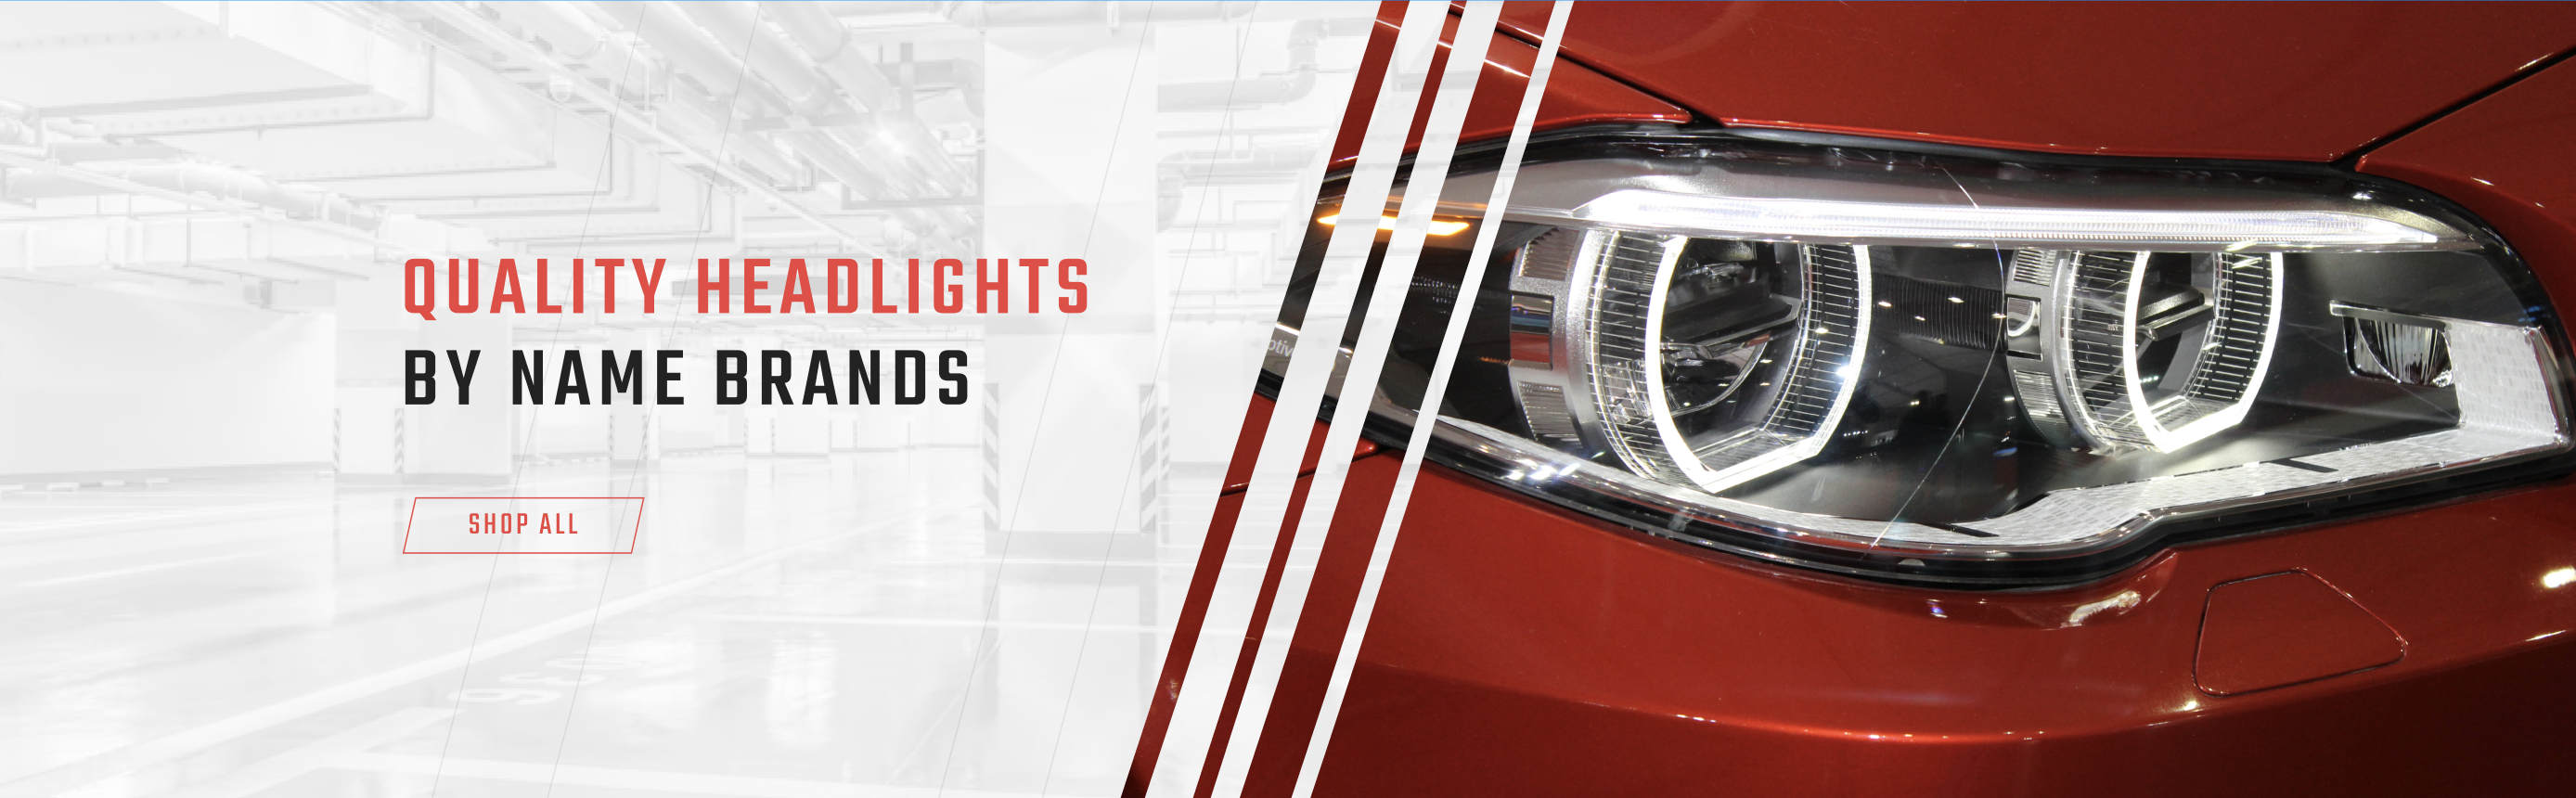 Banner, shop quality headlights by brand name